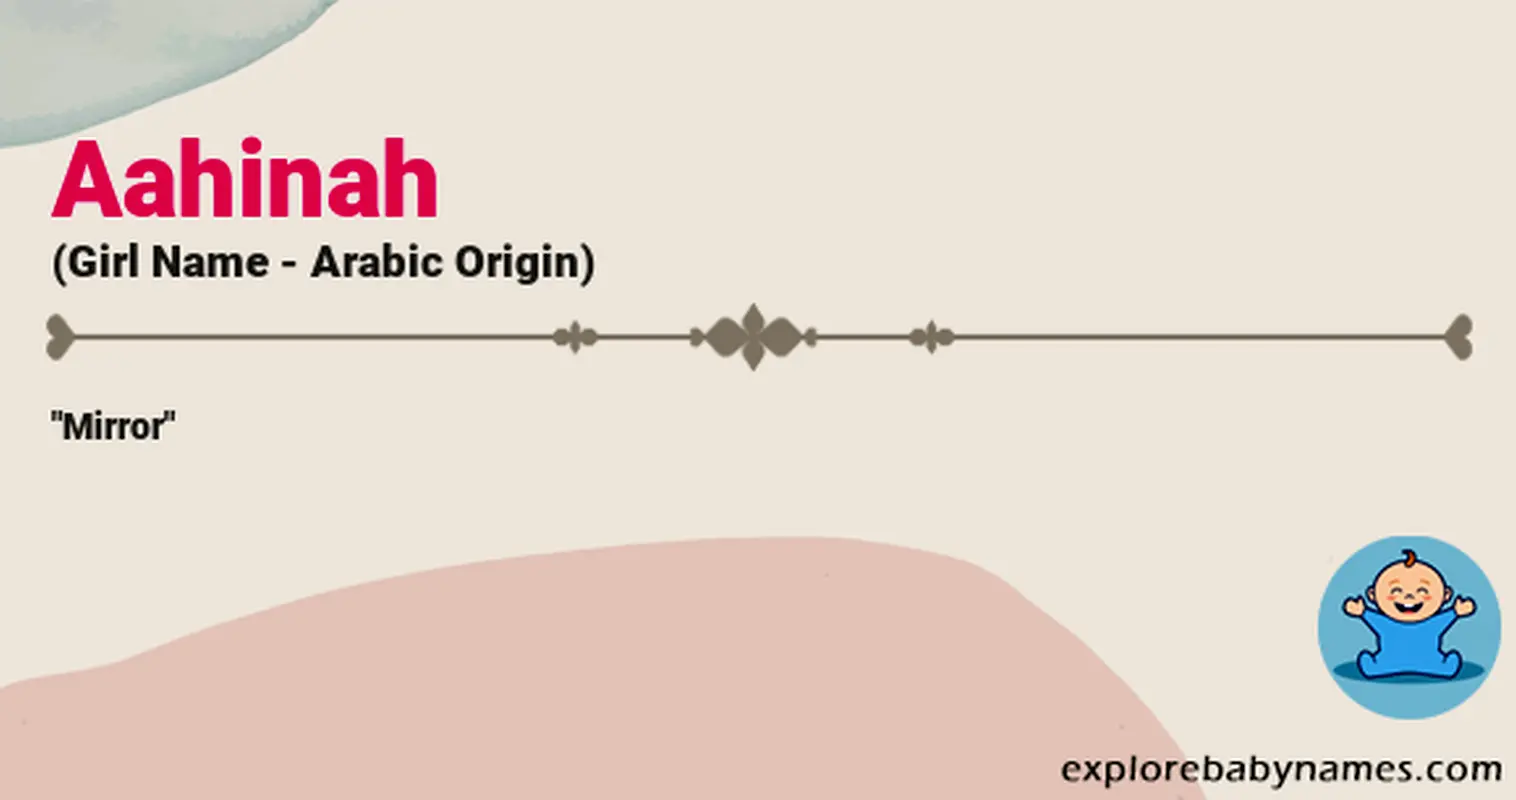 Meaning of Aahinah